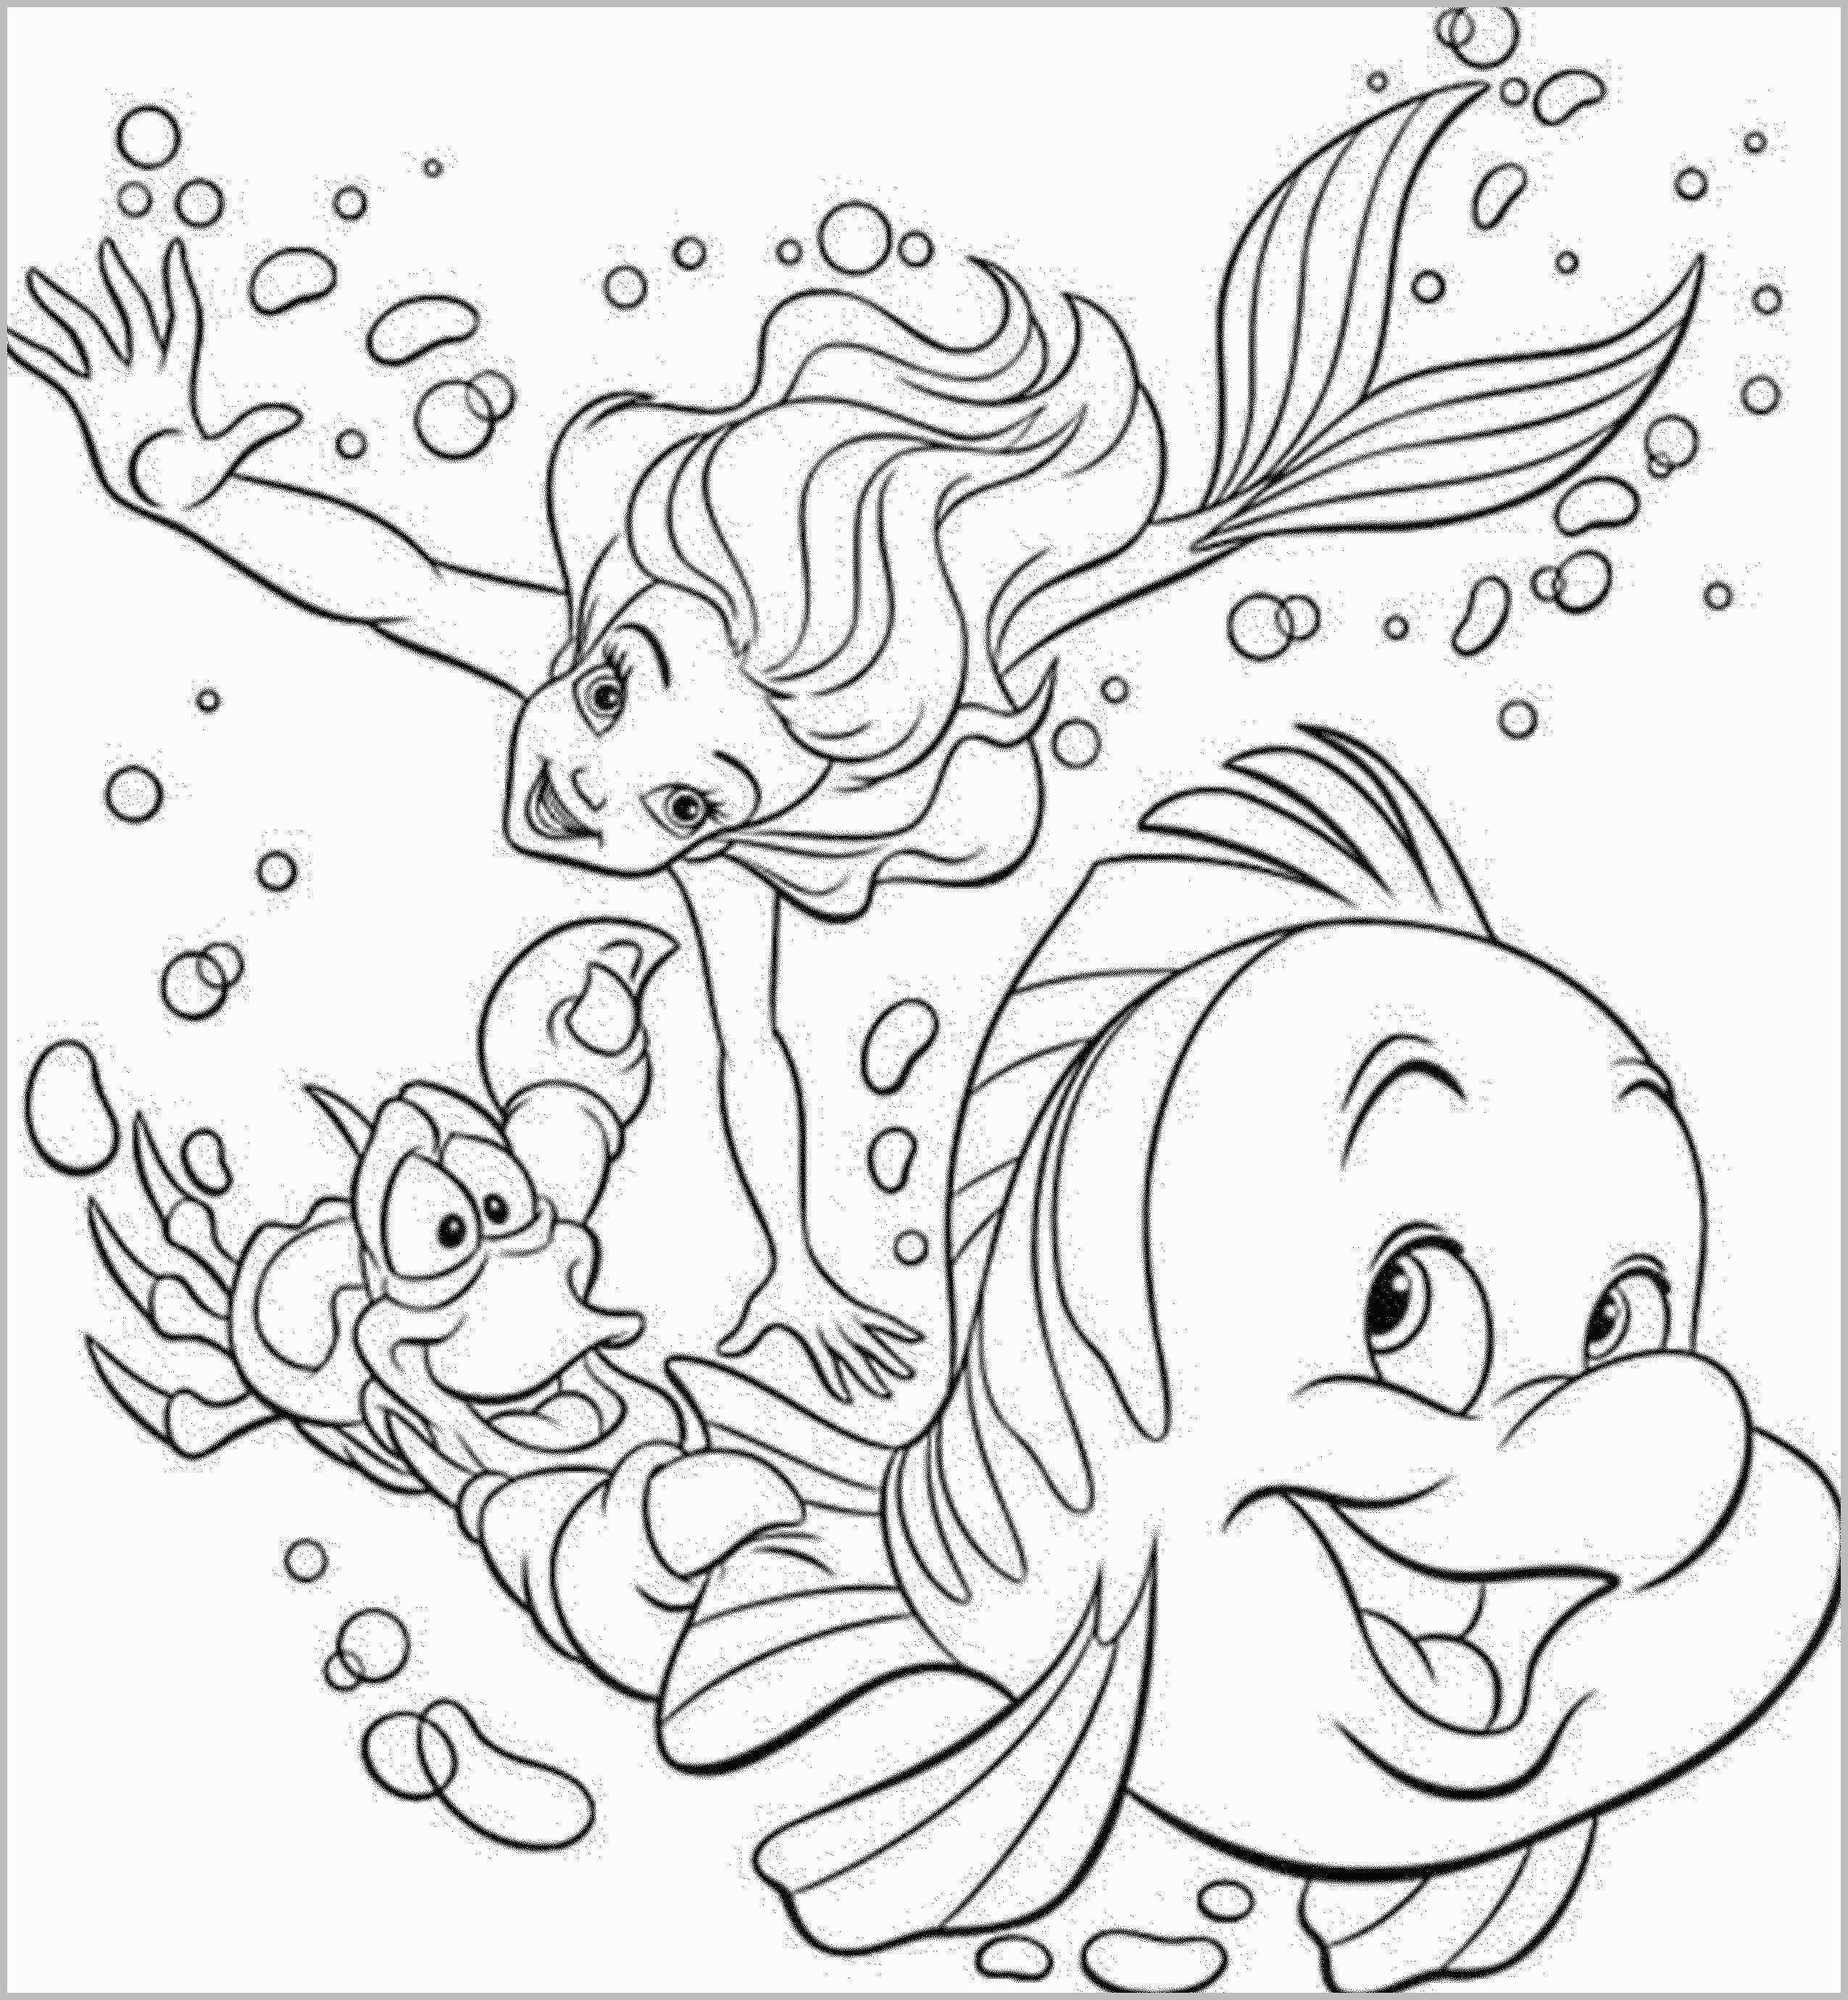 Coloring Pages Online To Print Barney Color Pages Online To Print Free Colouring Pdf Ardesengsk